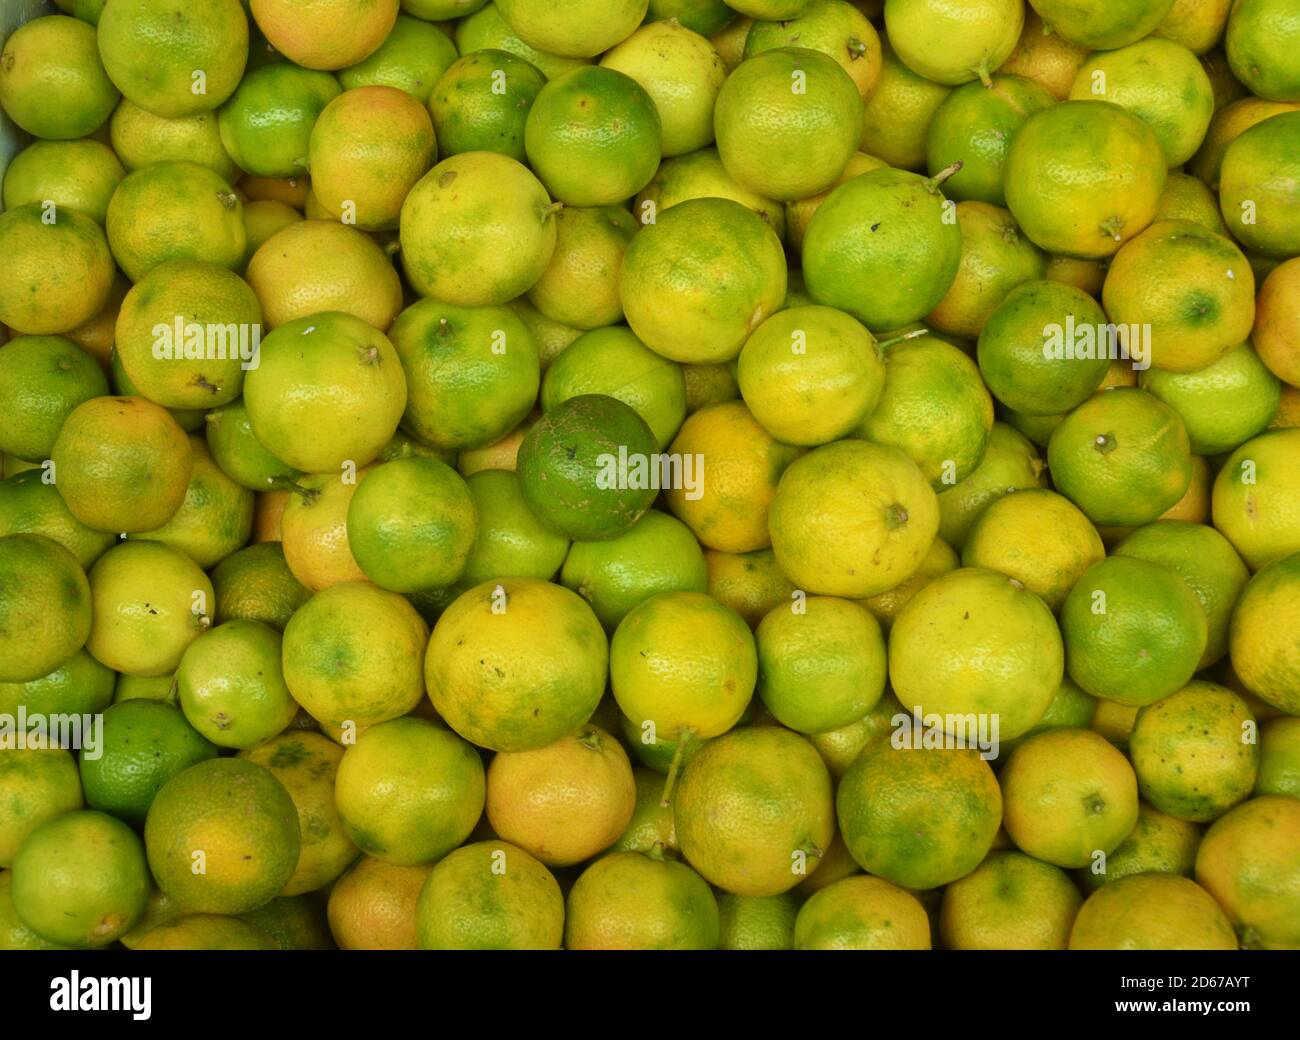 groups of green and yellow oranges for sale in the market Stock Photo